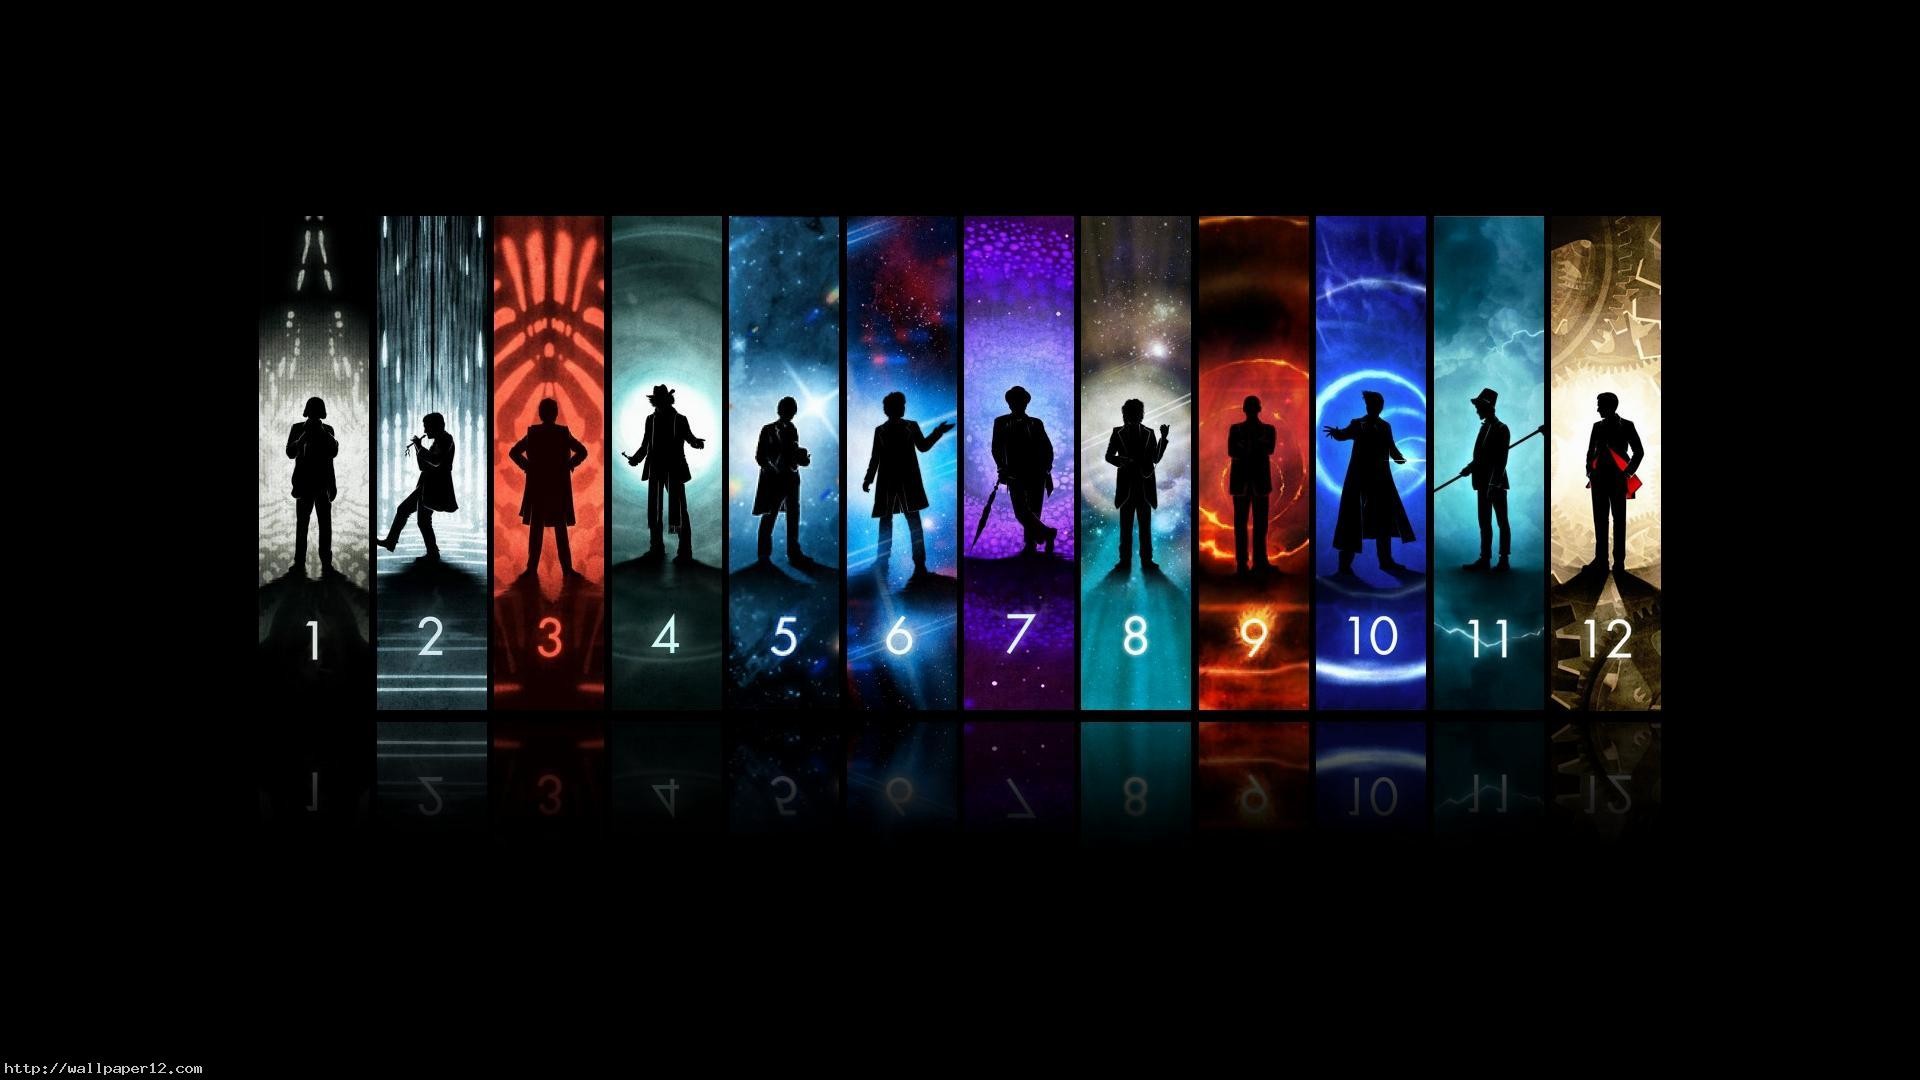 Give me your best Doctor Who phone wallpapers   rdoctorwho